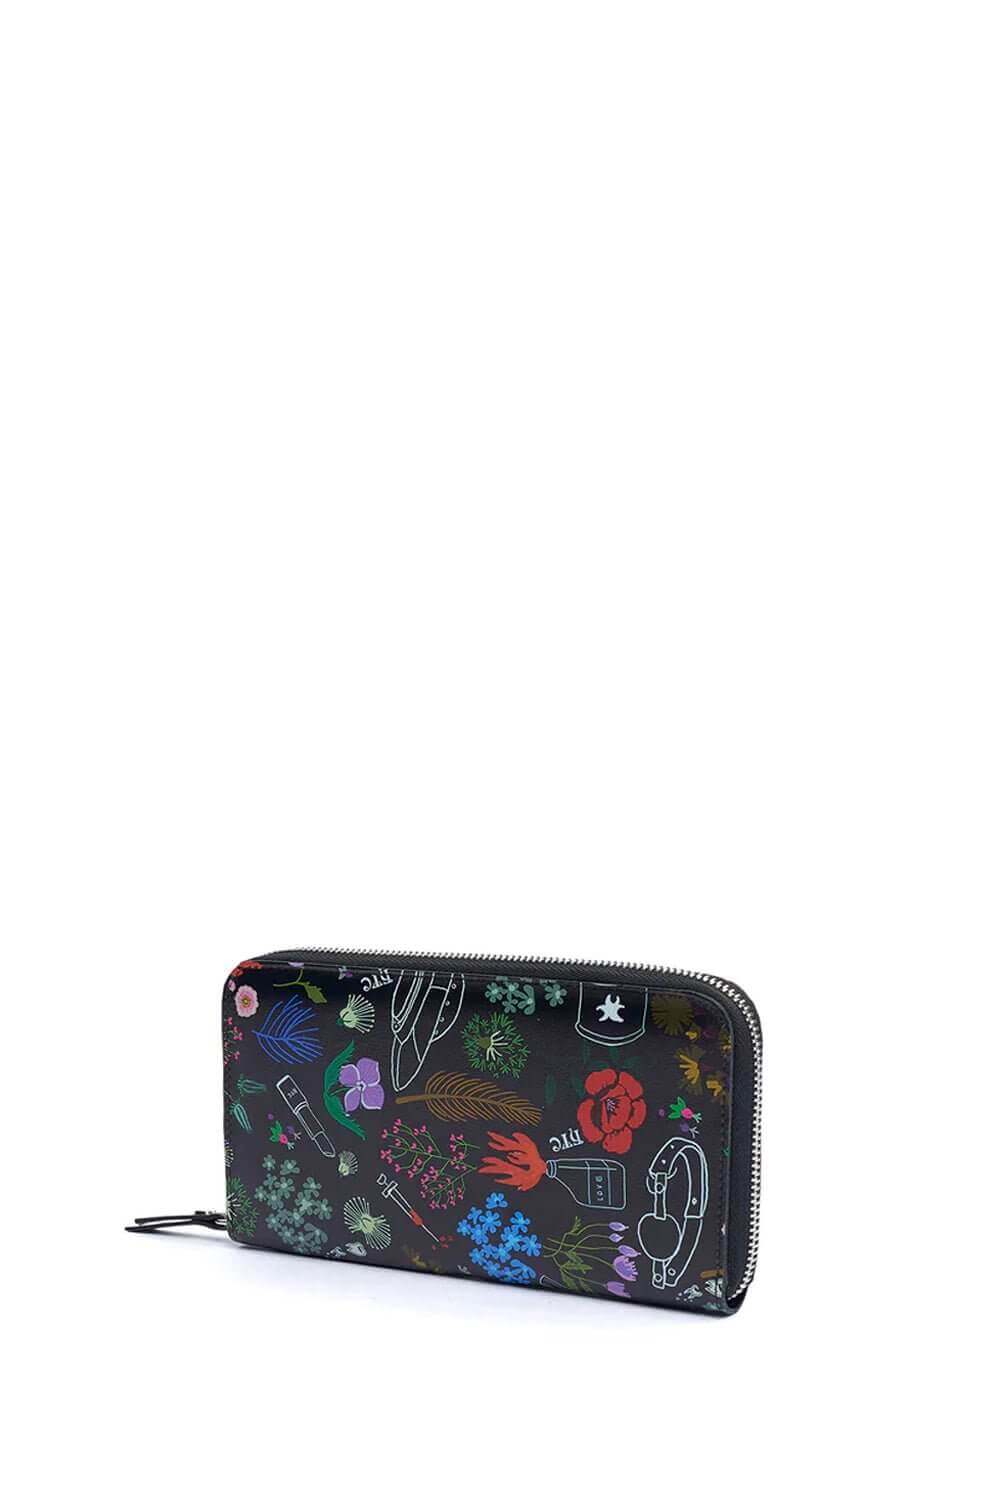 DIRTY FLOWERS ZIP WALLET Black leather coin purse with 'dirty flowers' print, zip closure and inner CC holder. Lenght: 18 cm. Height: 10 cm. Cowskin. Made In Italy. HTC LOS ANGELES